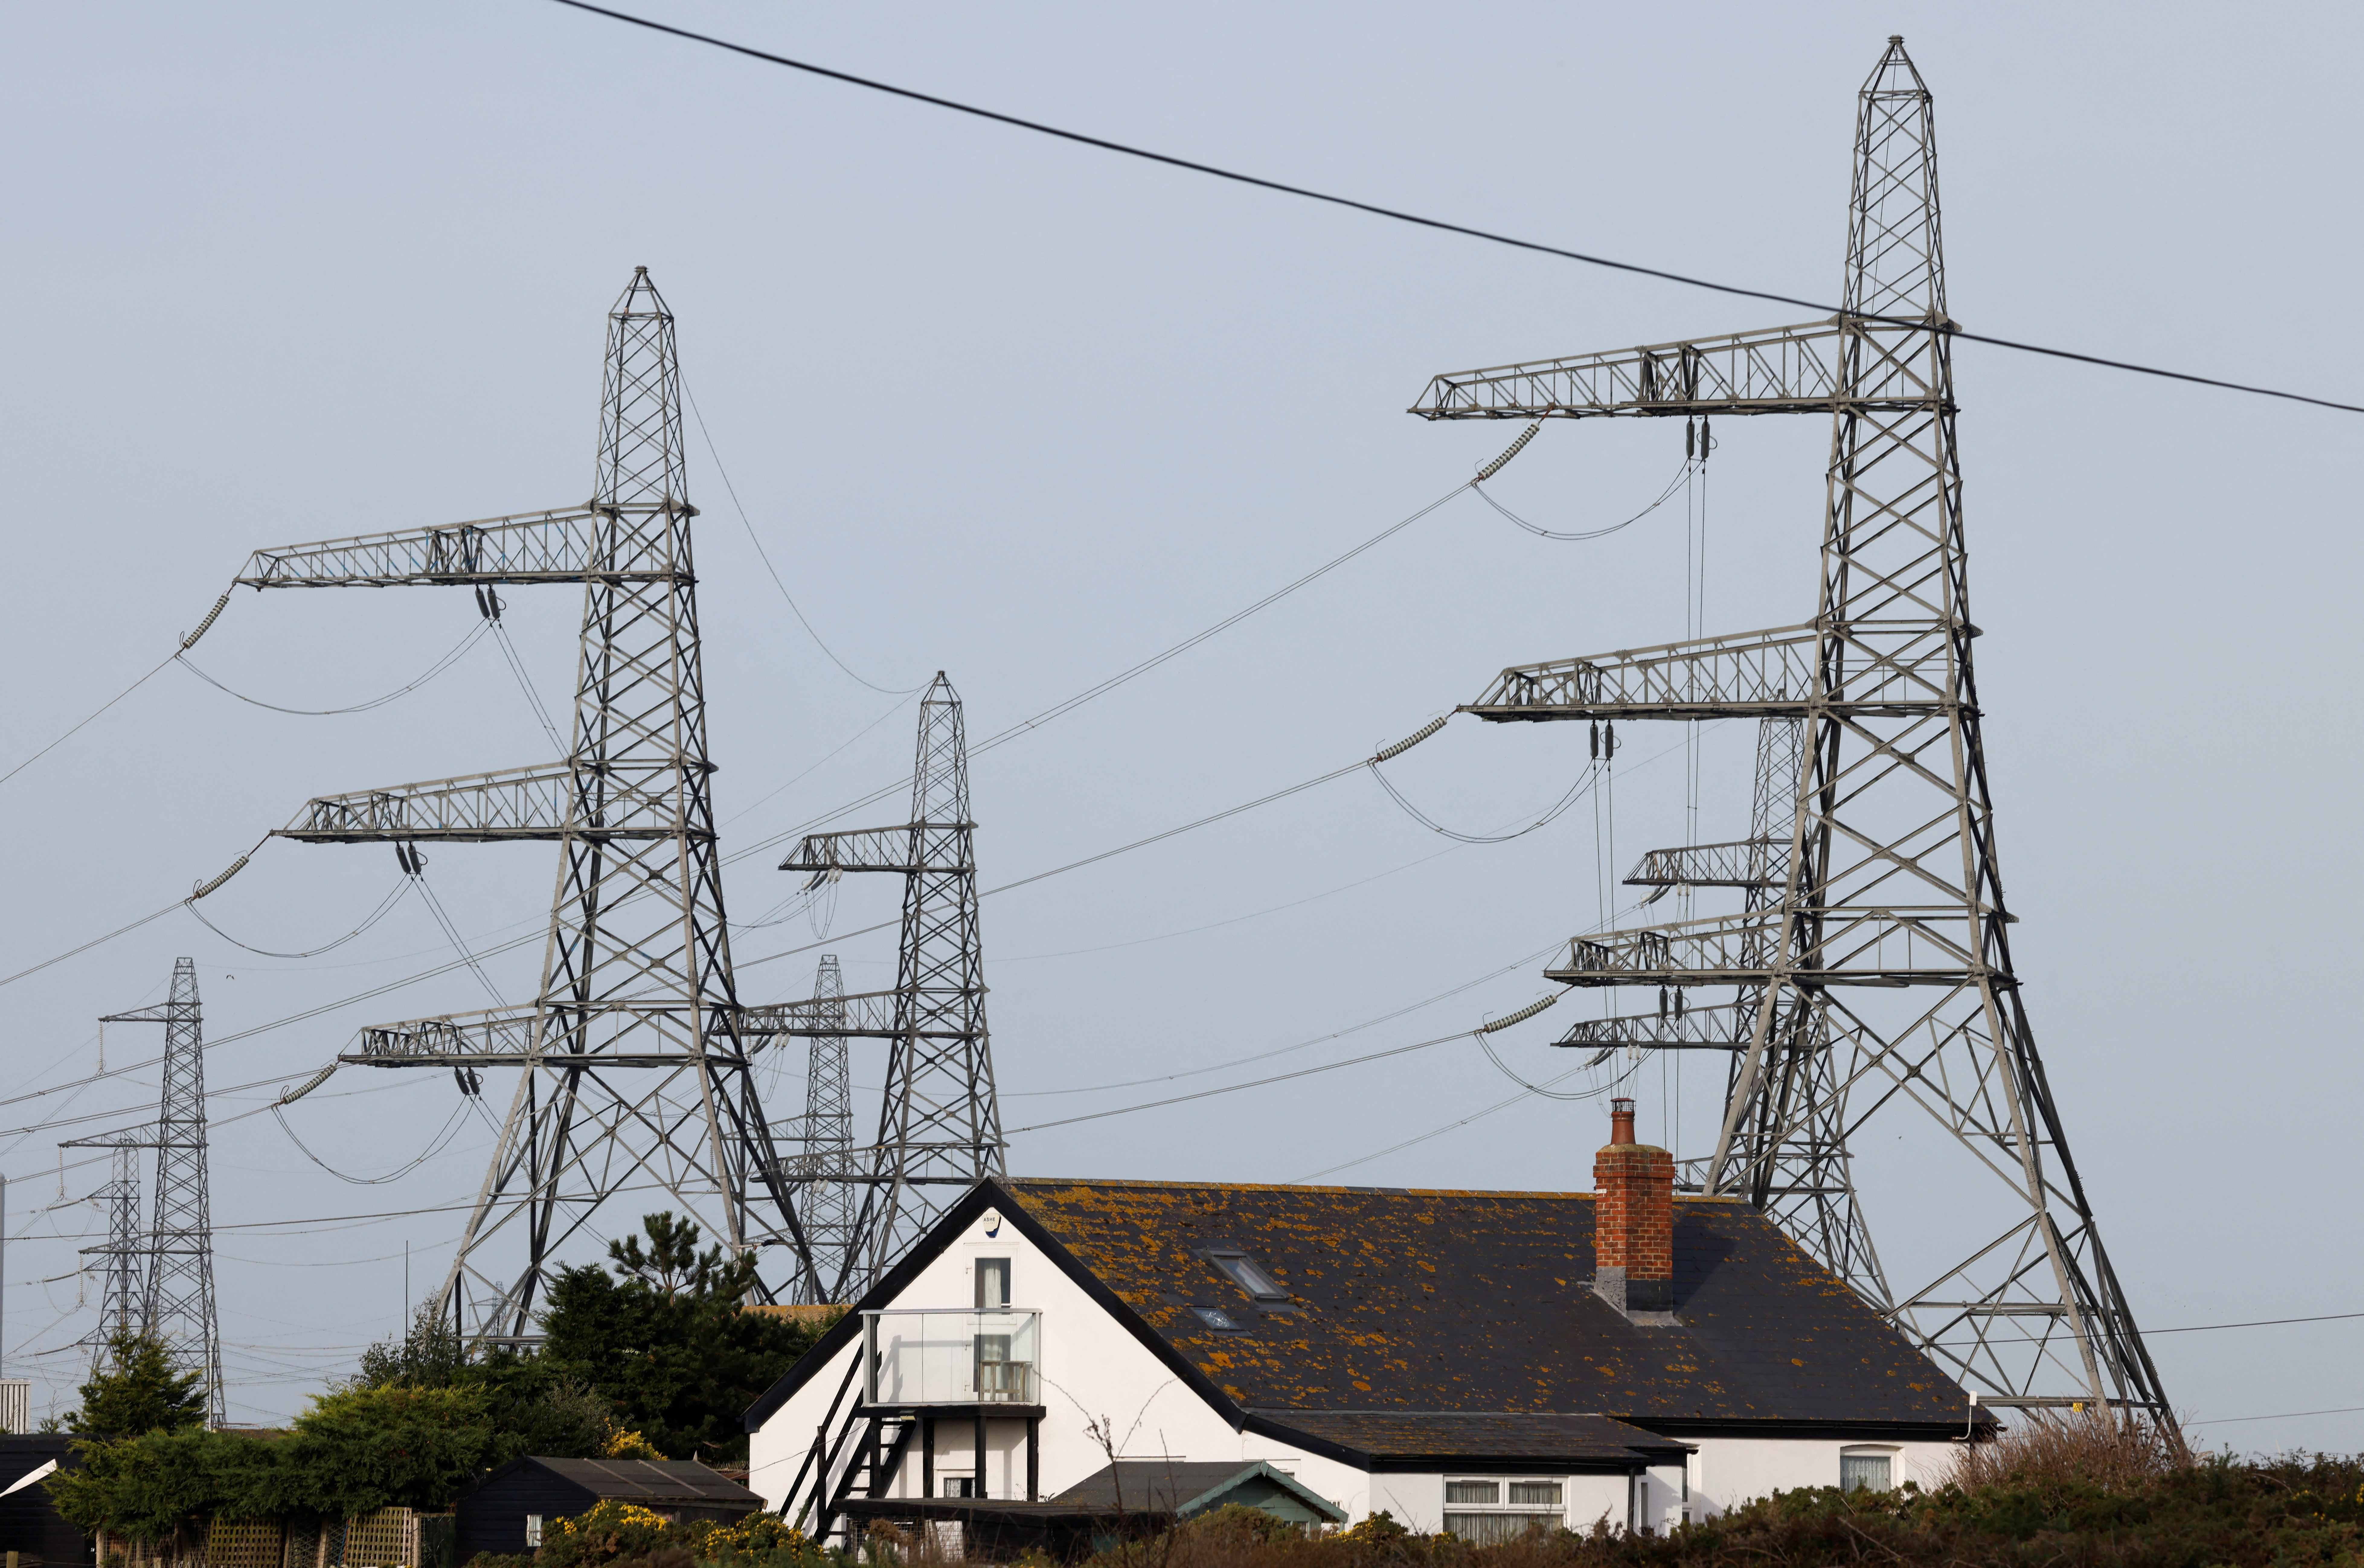 Electricity pylons are seen behind a local house in Dungeness